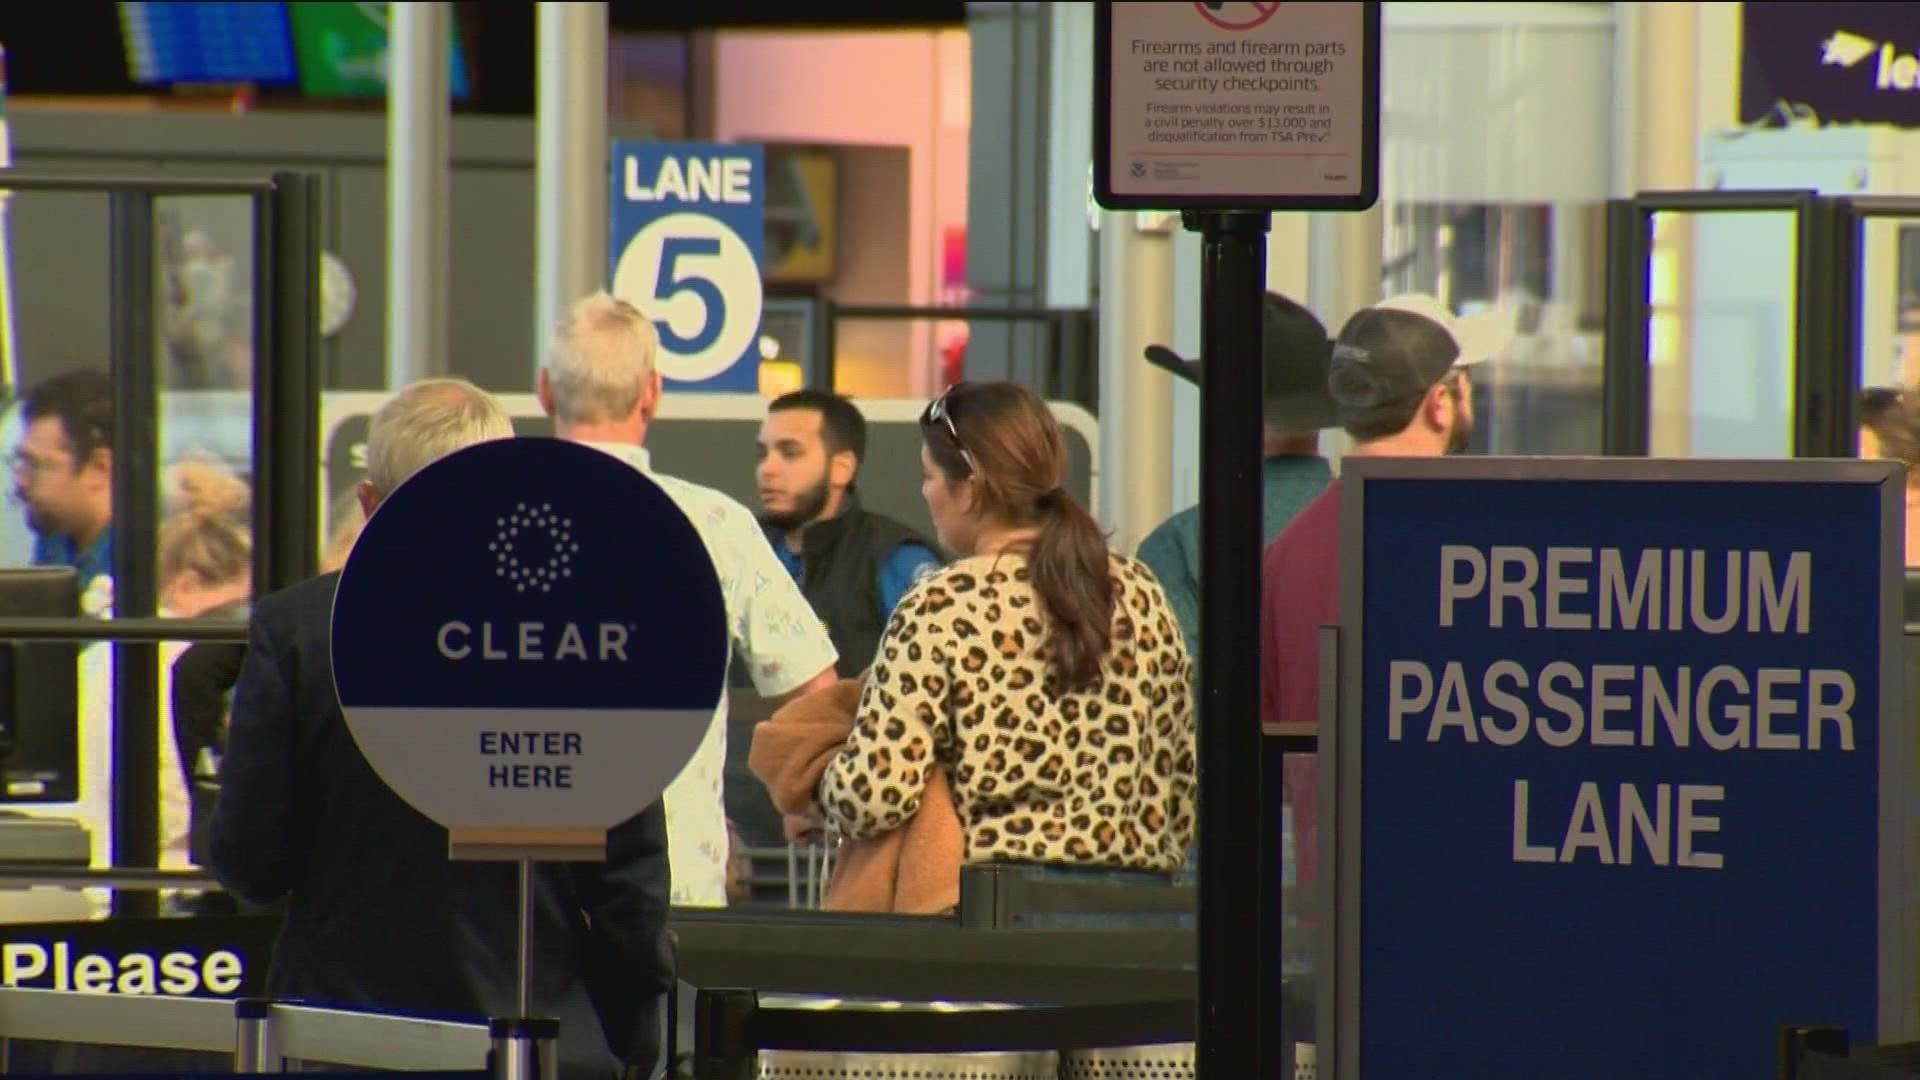 New data shows how much busier things are at the Austin airport than they were just a year ago. KVUE's Eric Pointer breaks down the numbers.